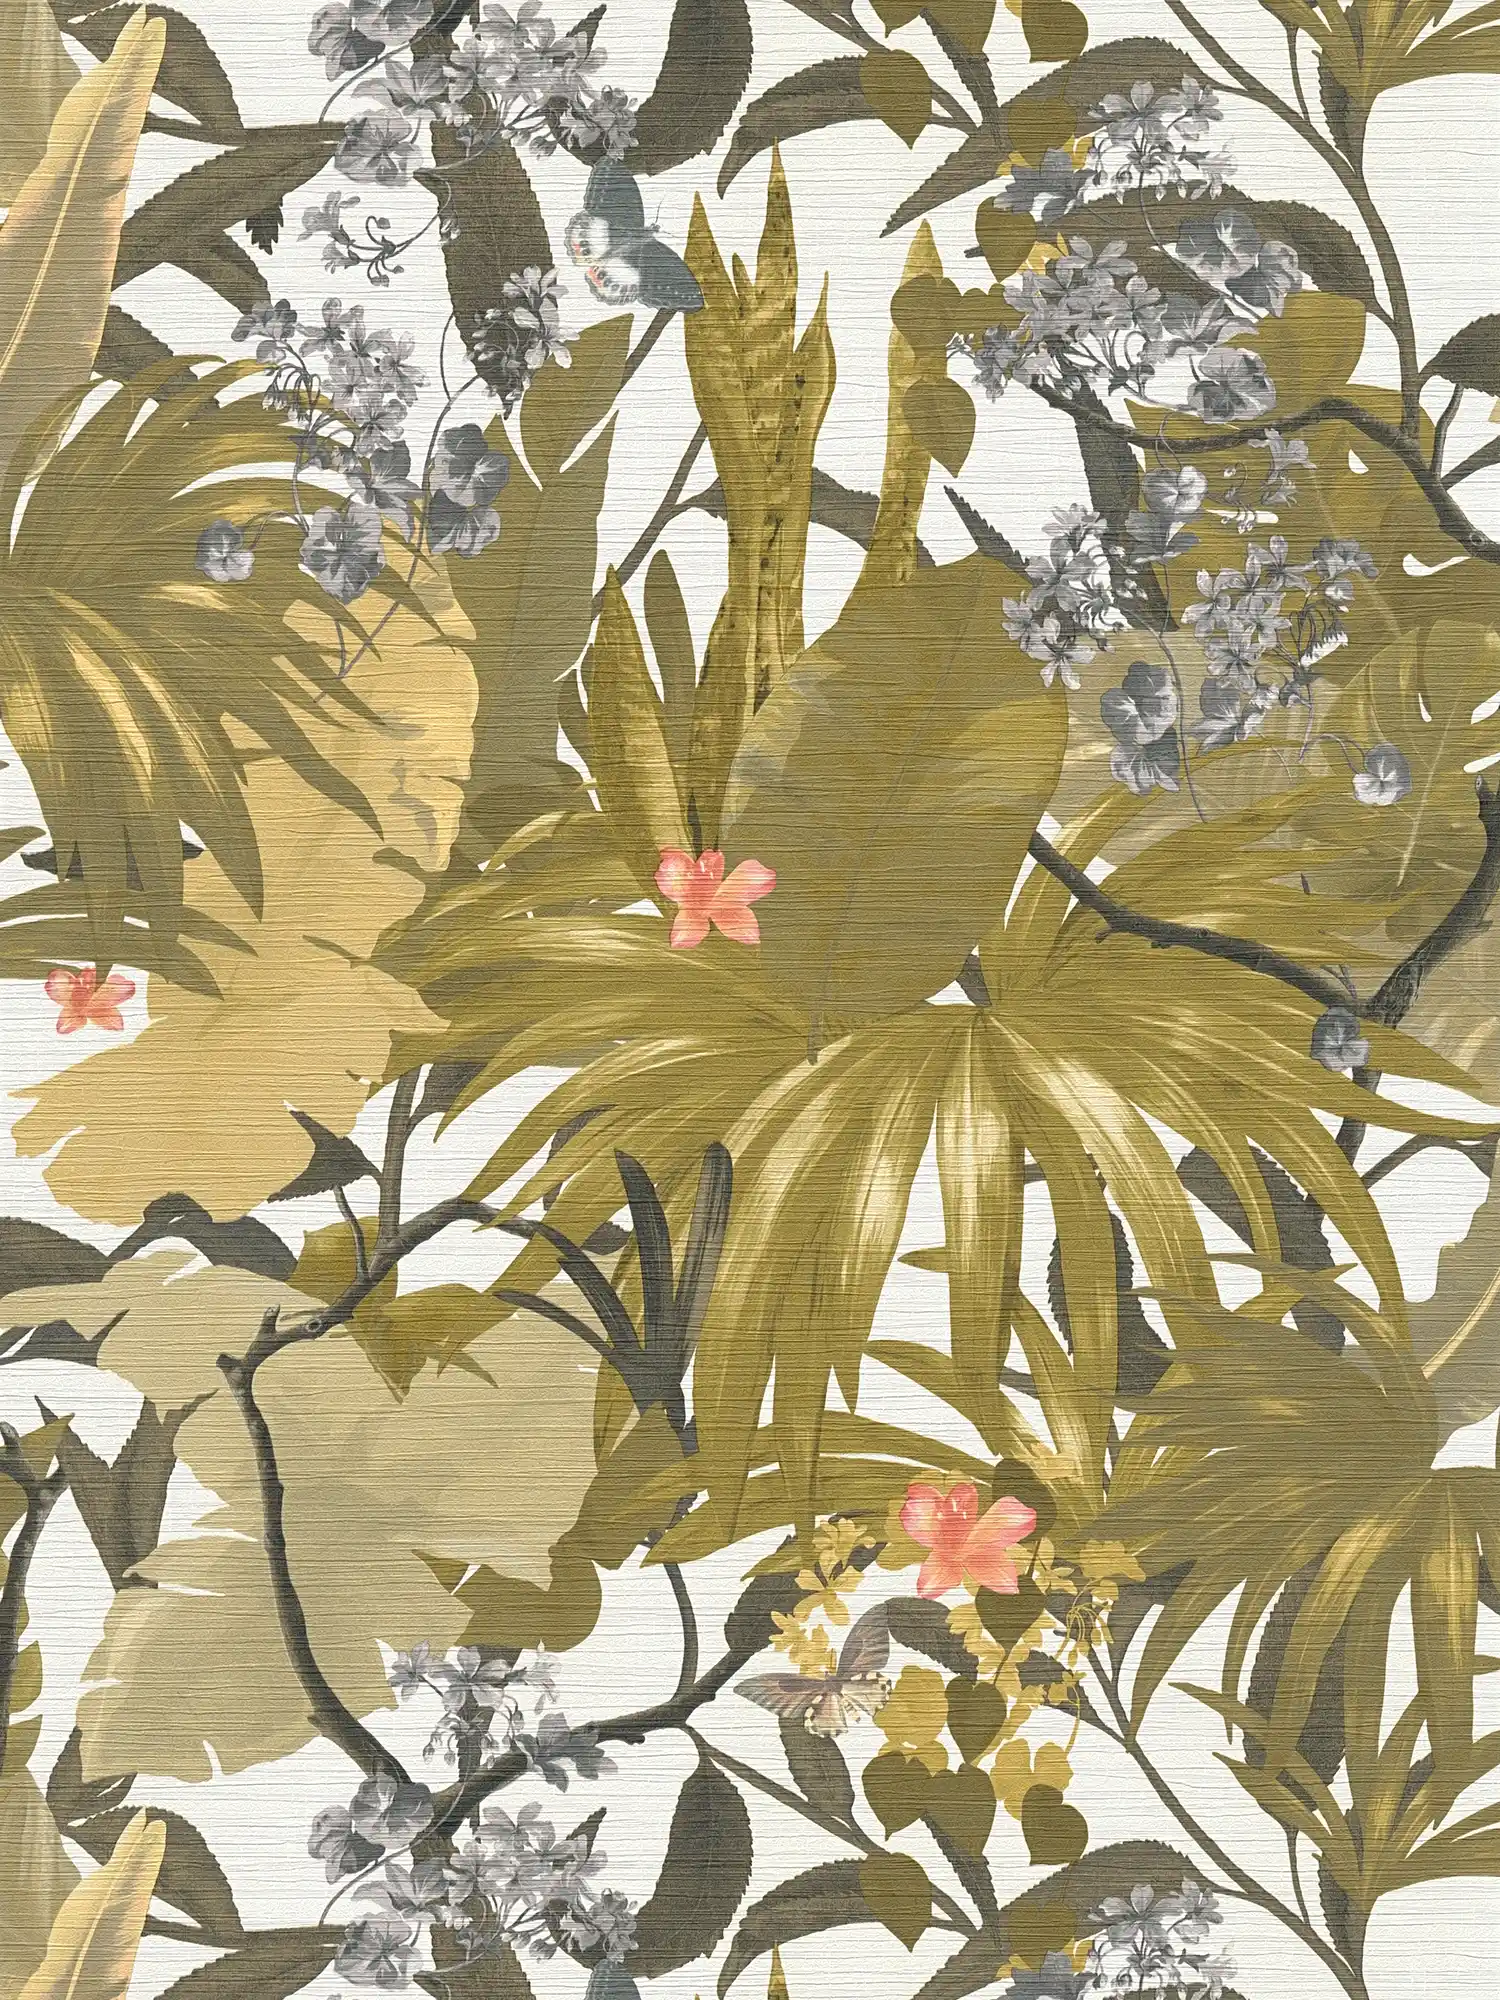 Wallpaper jungle design with leaf pattern - yellow, grey
